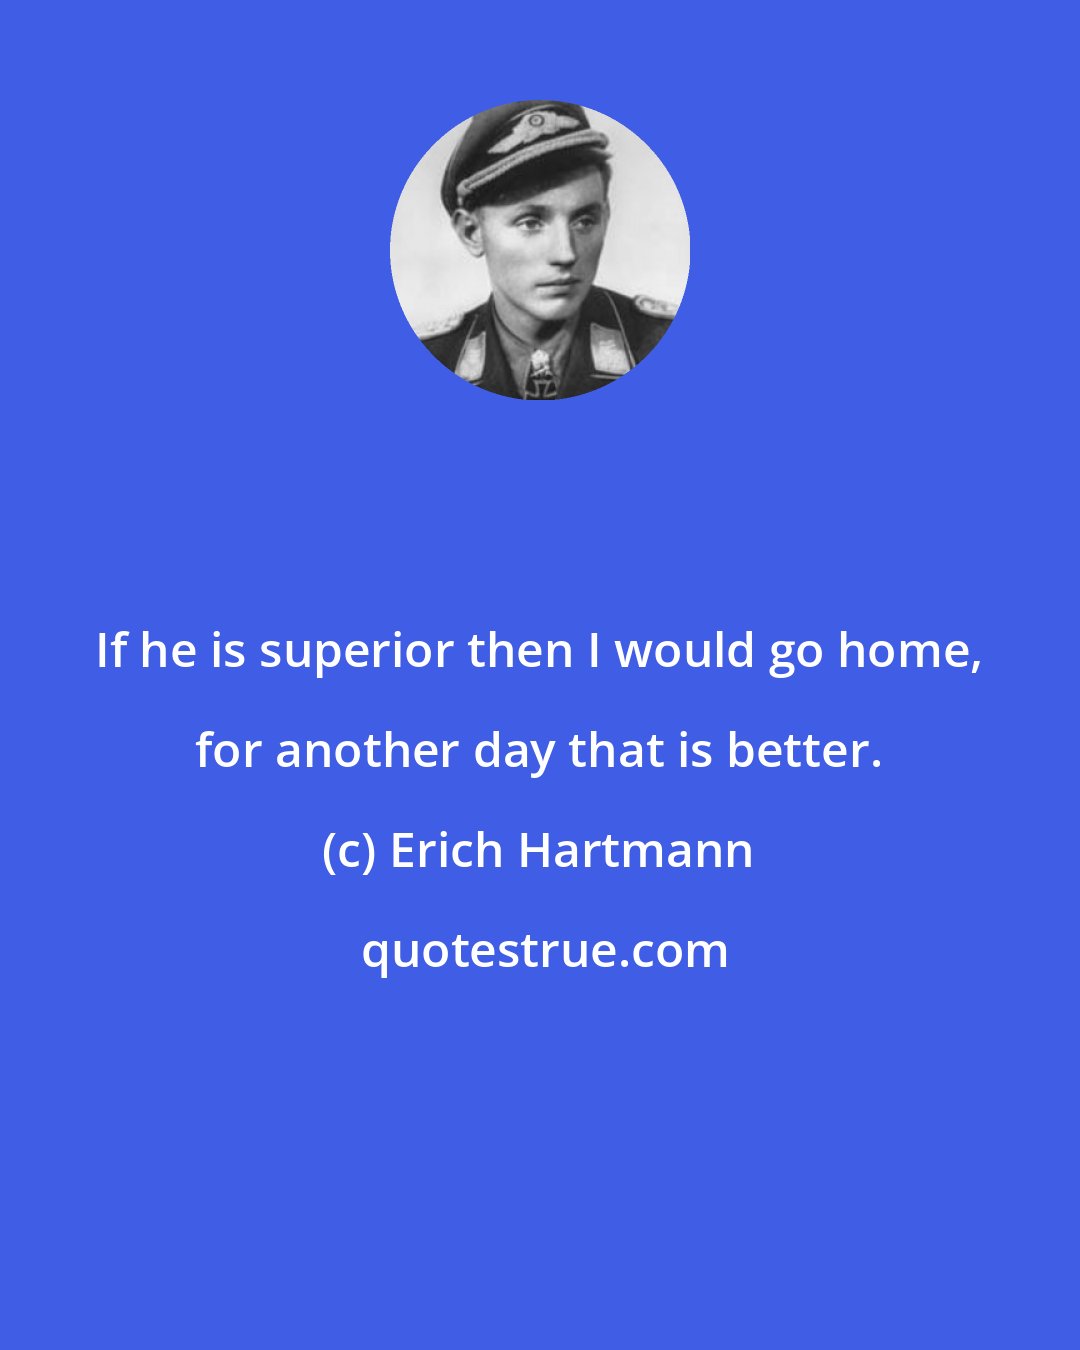 Erich Hartmann: If he is superior then I would go home, for another day that is better.